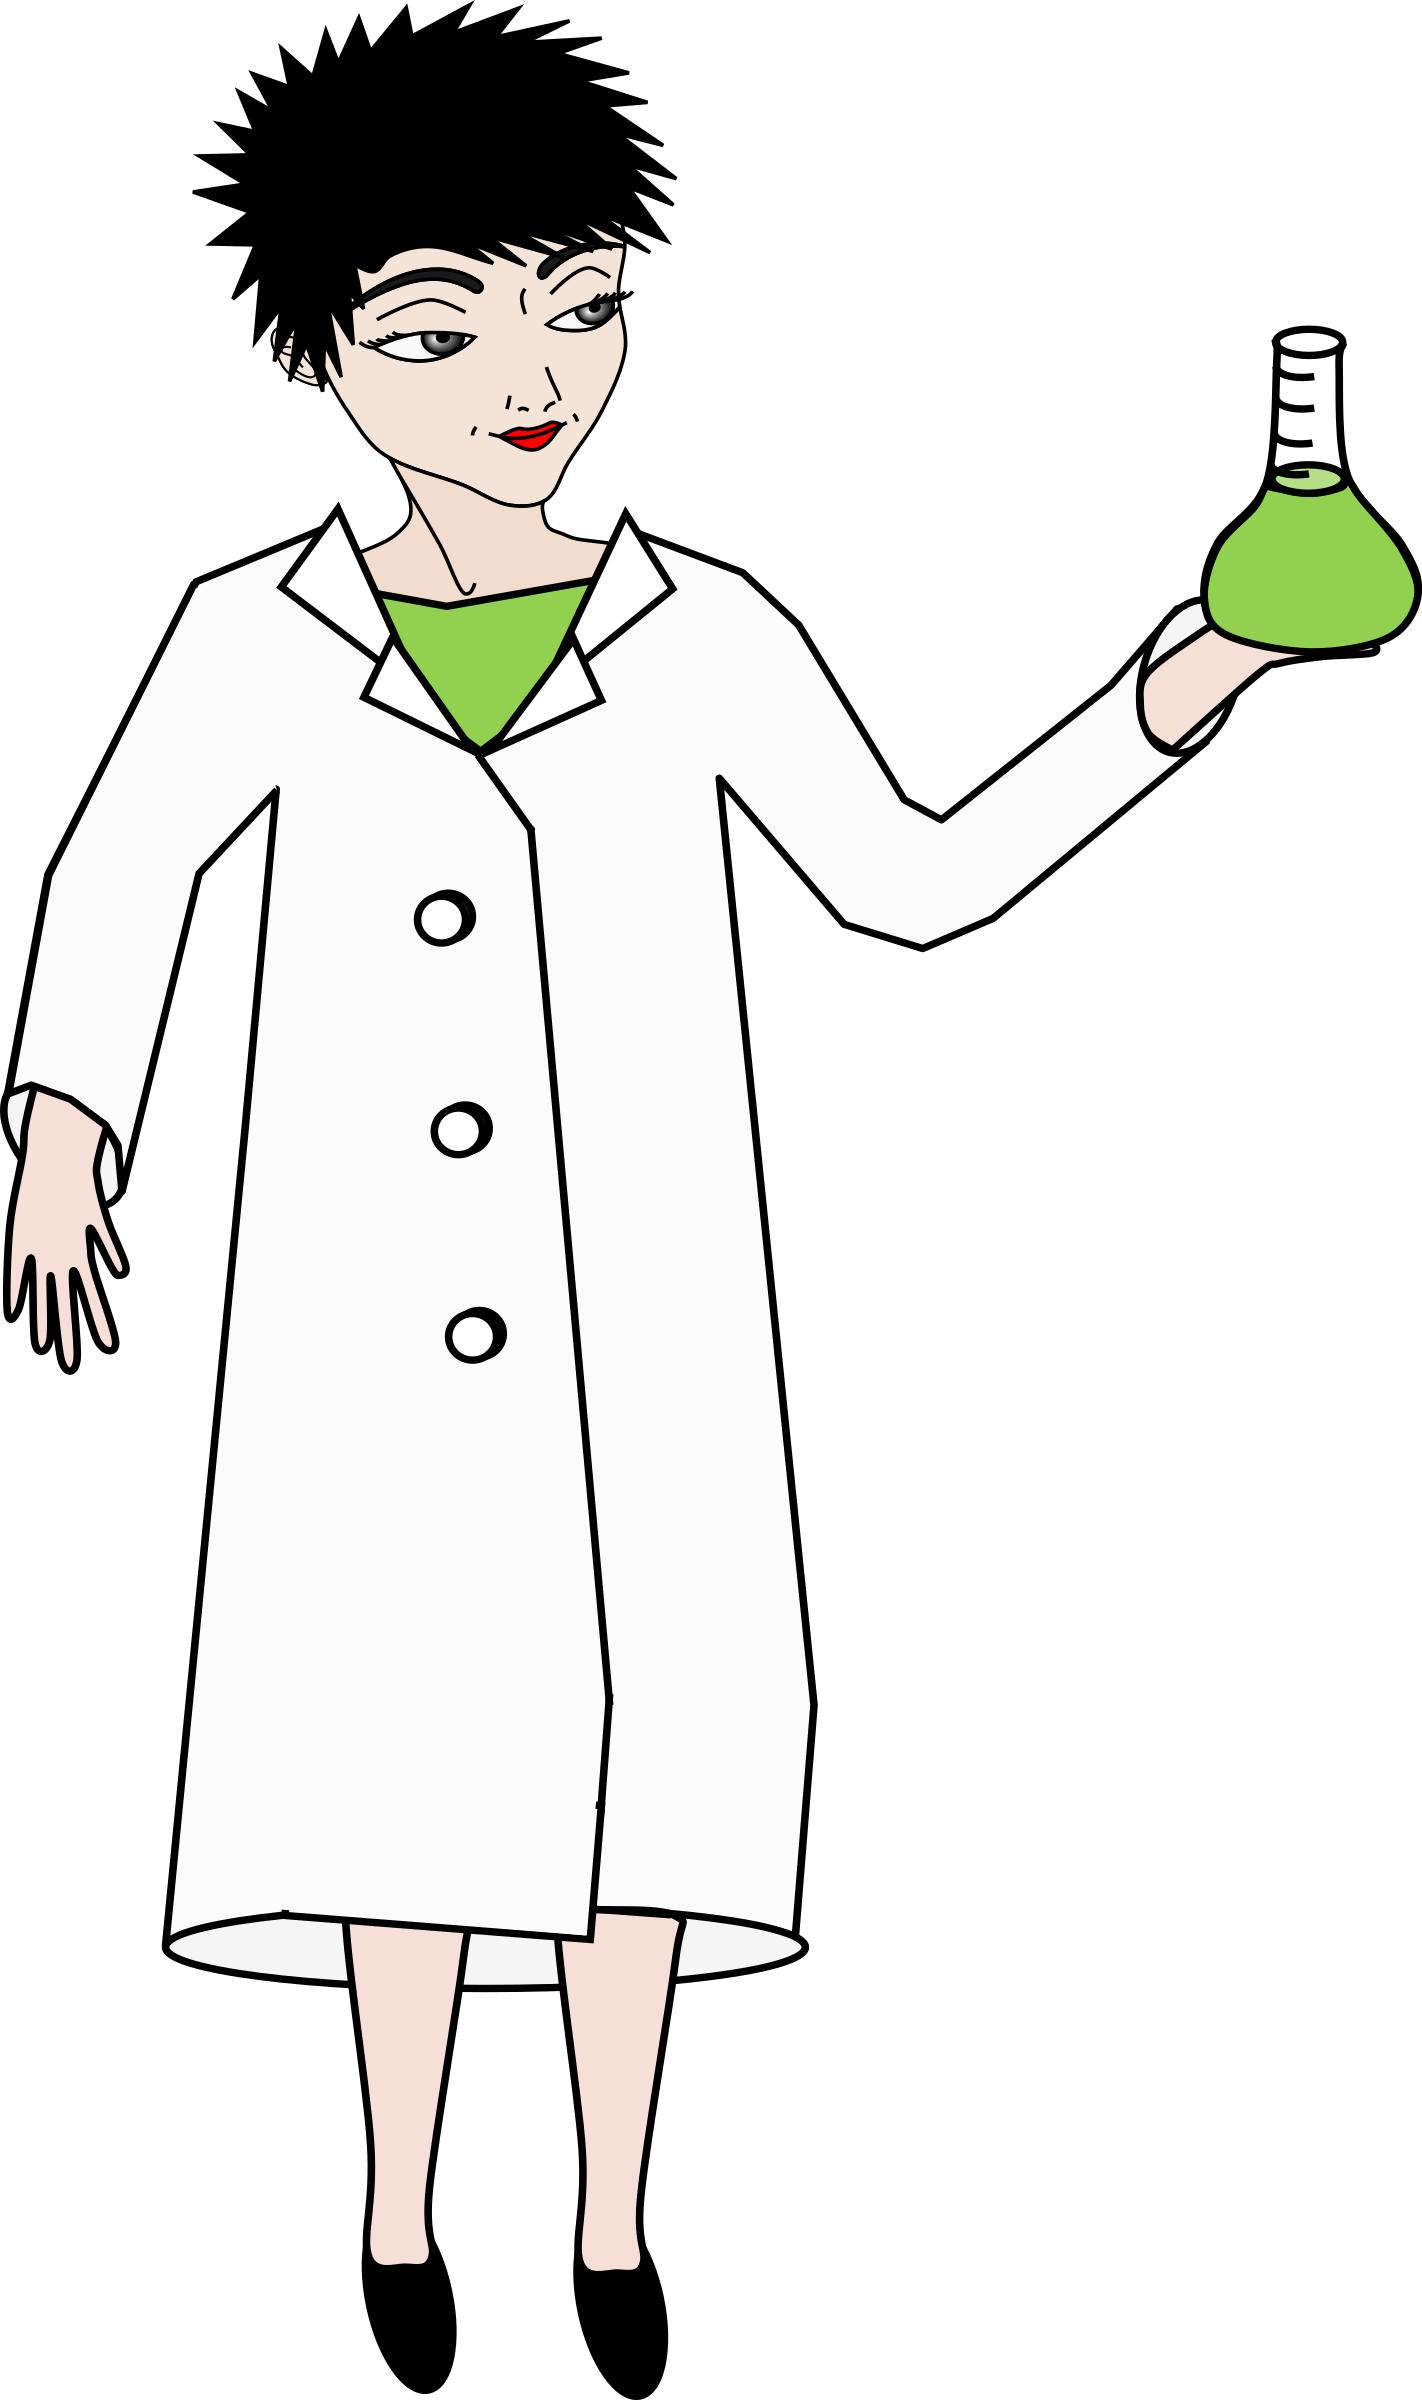 Science student with spiky hair png